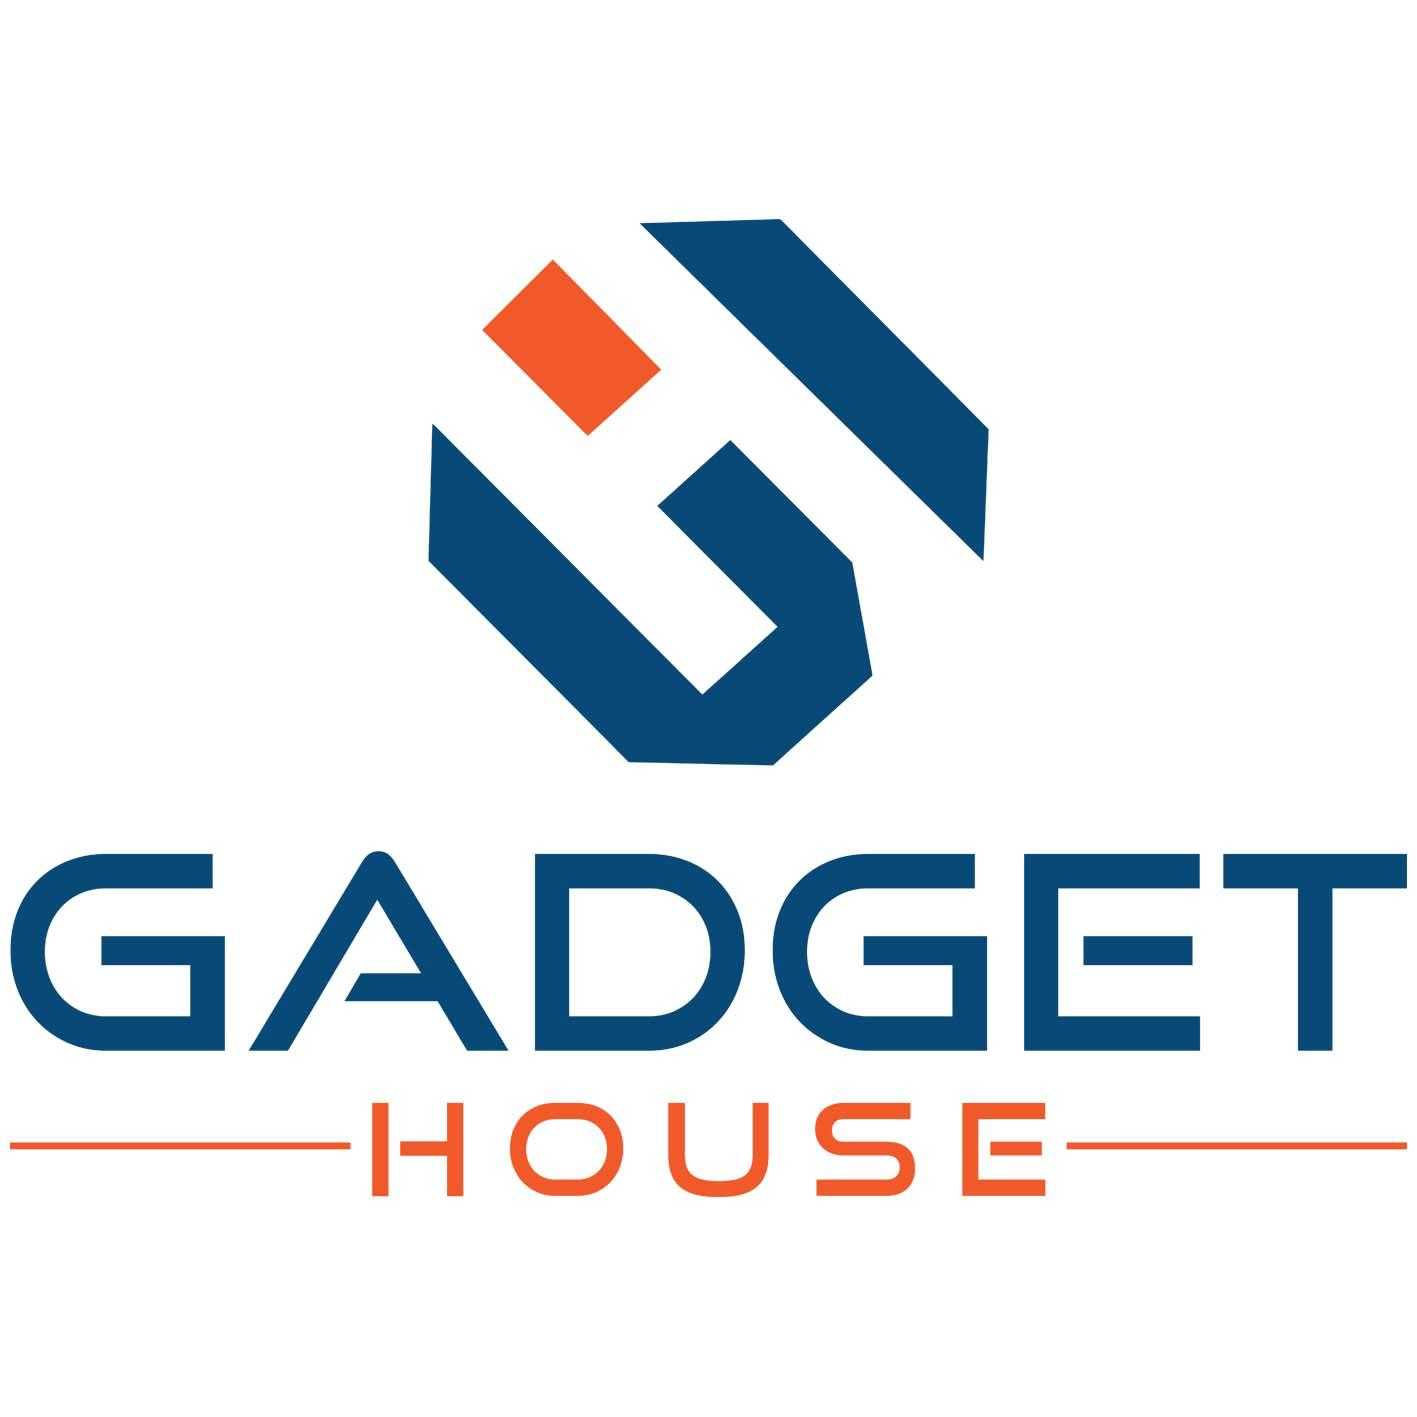 Gadget House Indonesia